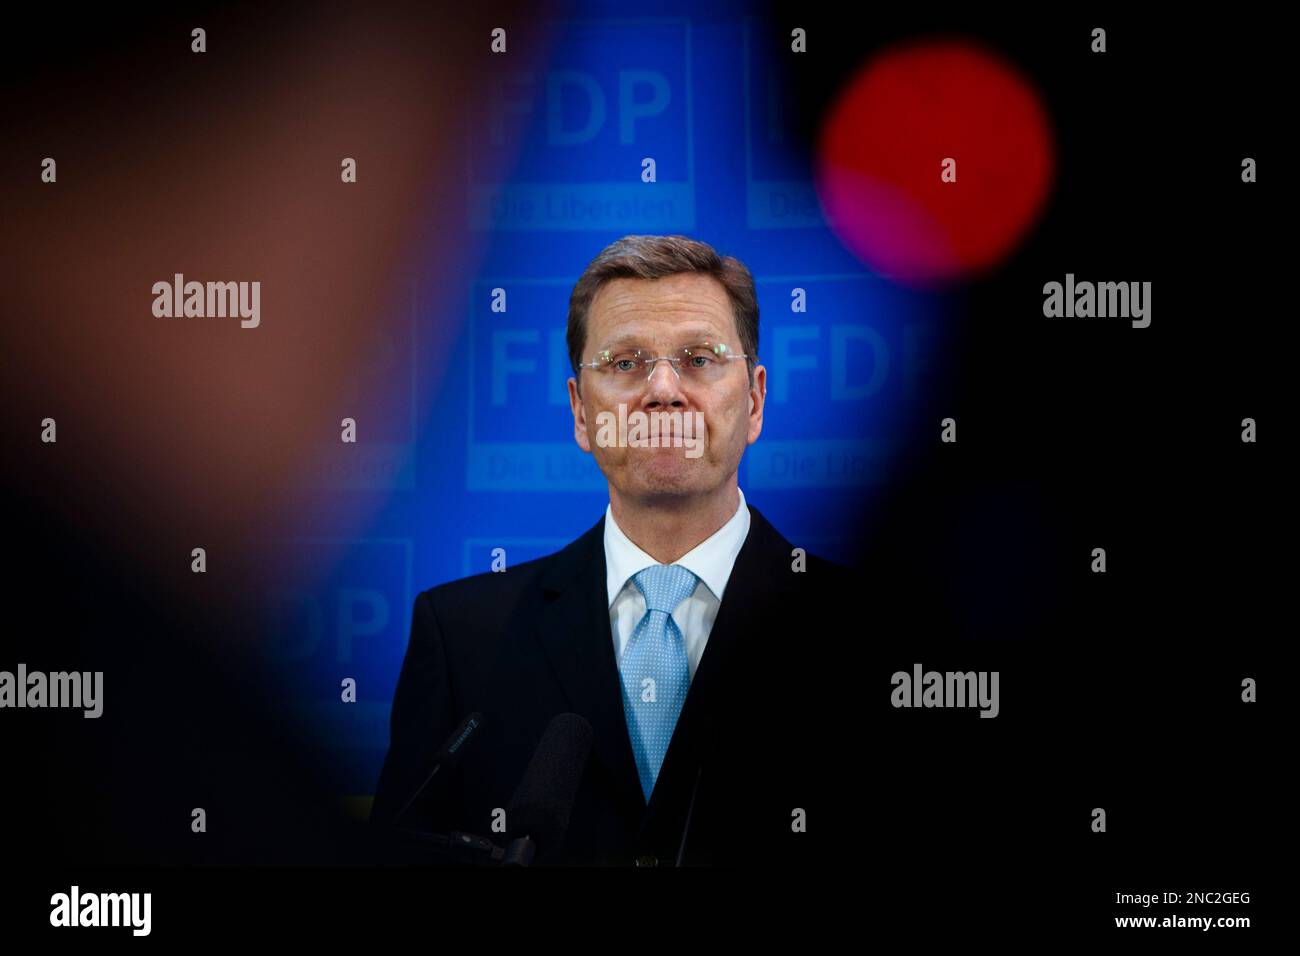 Free Democratric Party (FDP) Chairman and German Foreign Minister Guido Westerwelle addresses the media in Berlin on Monday, March 28, 2011. The Free Democrat's have lost about the half of their votes in the regional state elections in Baden-Wuerttemberg and Rhineland-Palatinate on Sunday.German Chancellor Angela Merkel's conservative party has suffered a defeat in Sunday's state election after almost six decades in powerin Baden-Wuerttemberg . The opposition anti-nuclear Greens could win their first-ever governorship in Baden-Wuerttemberg. (AP Photo/Markus Schreiber) Stock Photo